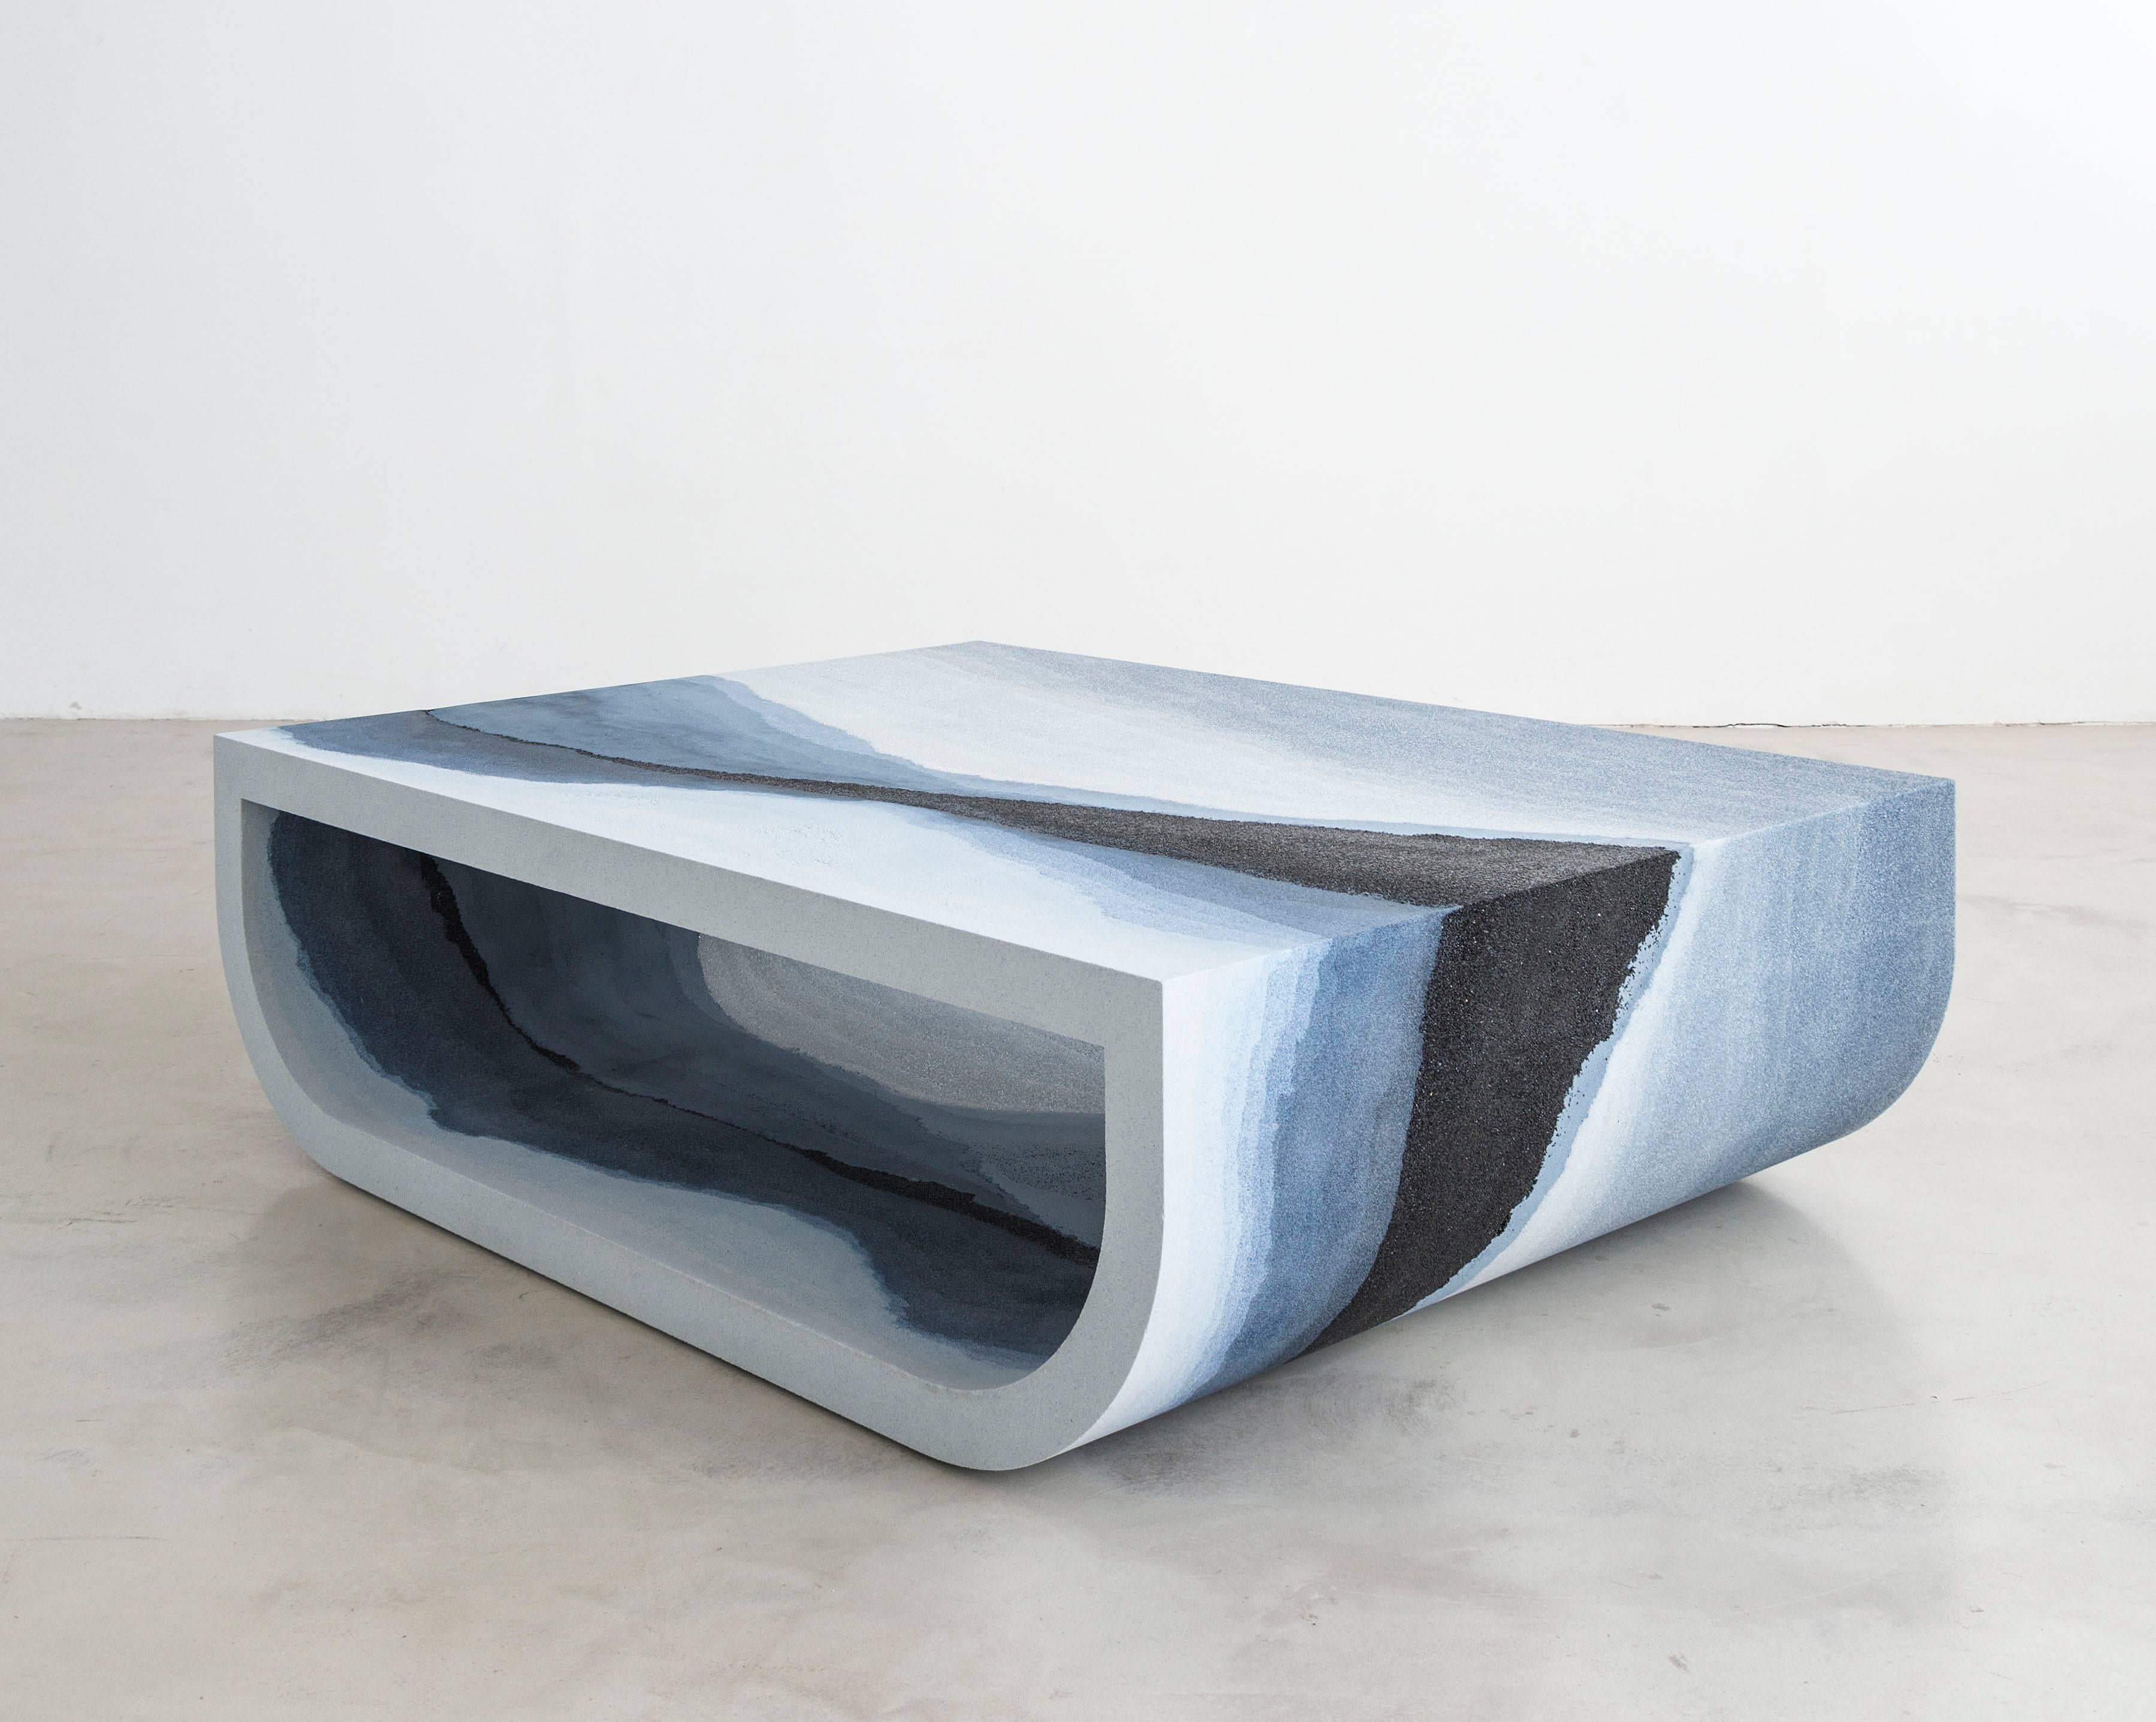 A layering of glass, sand, and silica, the made-to-order coffee table consists of gradients of tones and textures suggesting layers of earth, mountain ranges, otherworldly skies and bodies of water. The hand-dyed granules are stratified with